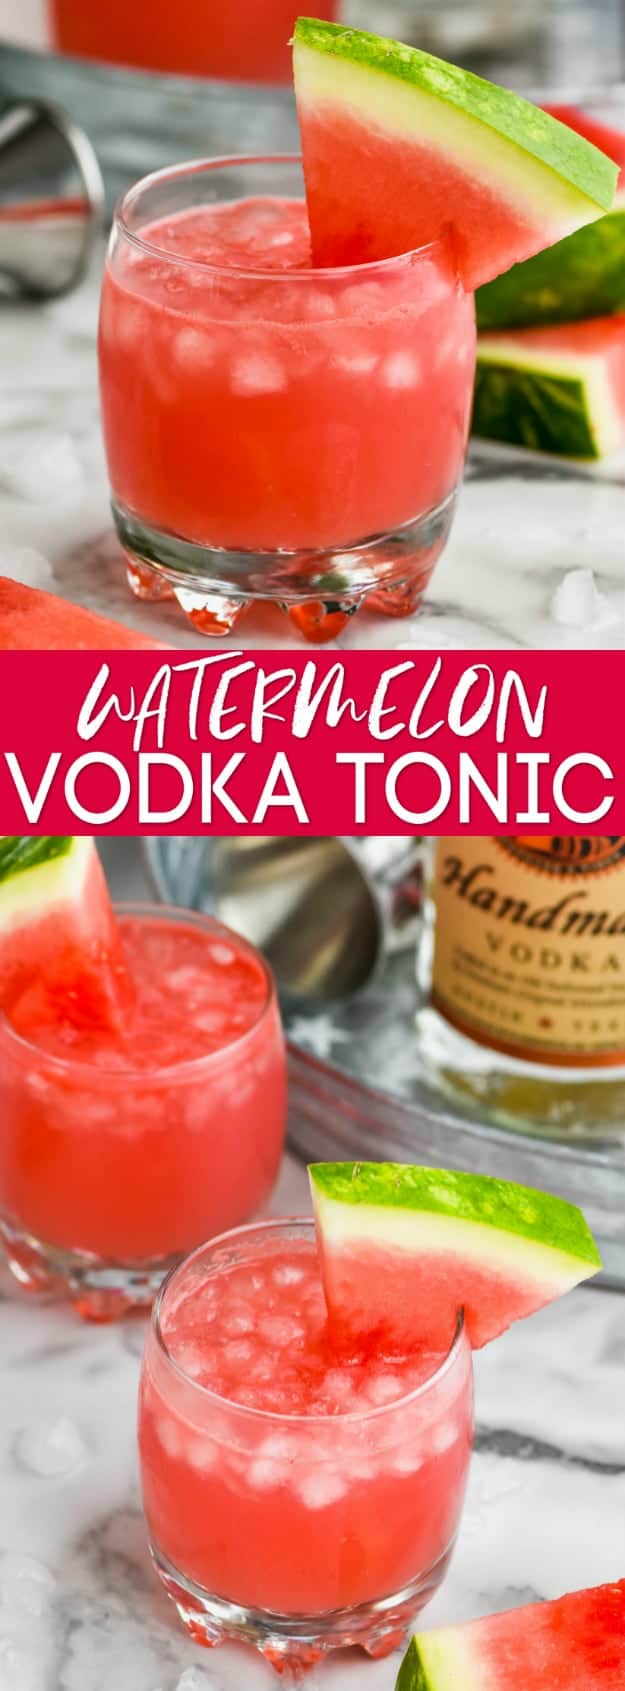 collage of photos of watermelon vodka tonic